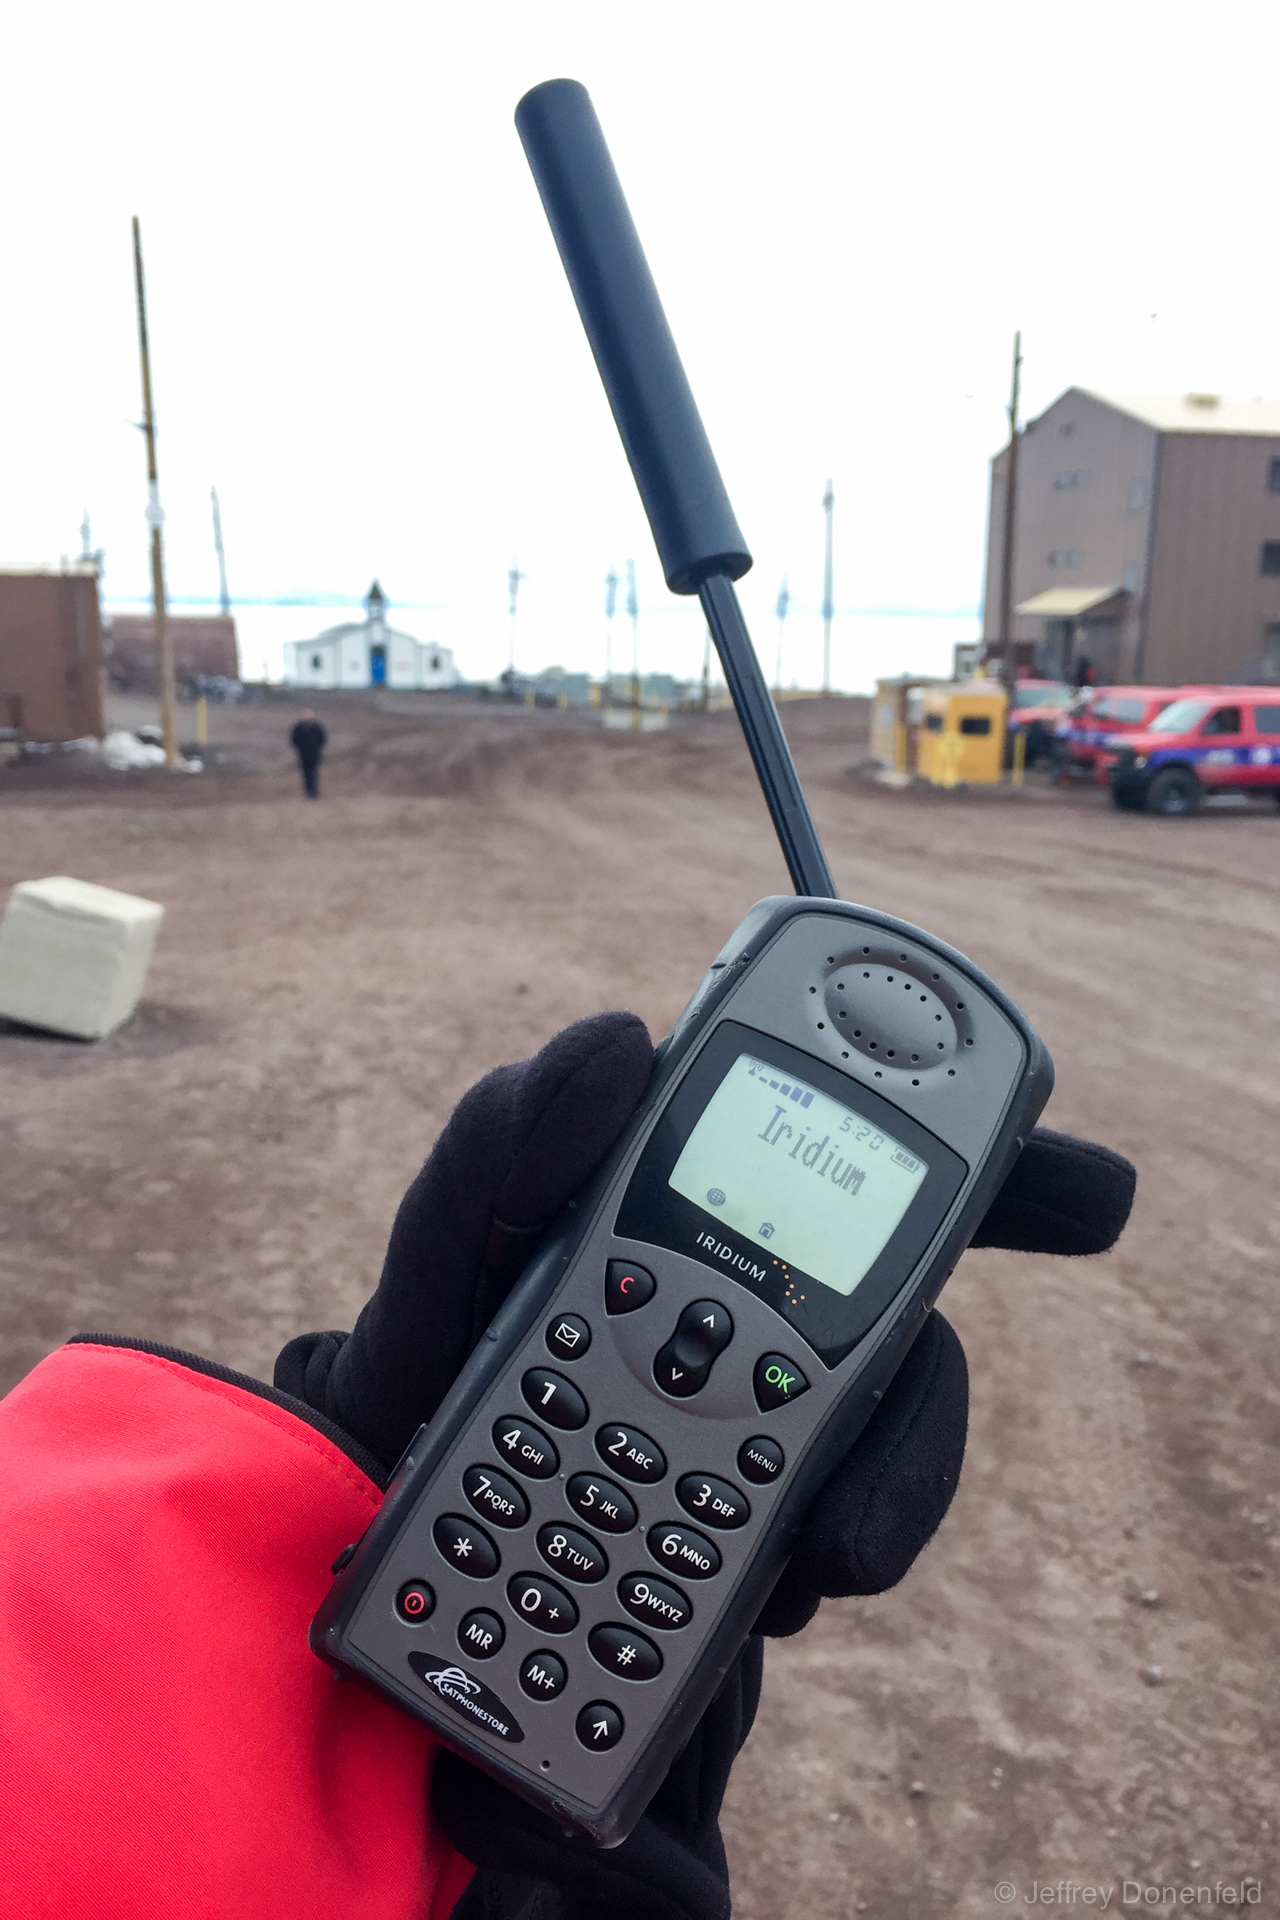 Most science teams have their own dedicated Iridium Satellite Phone. It's quite convenient, and in Antarctica the connection is great.